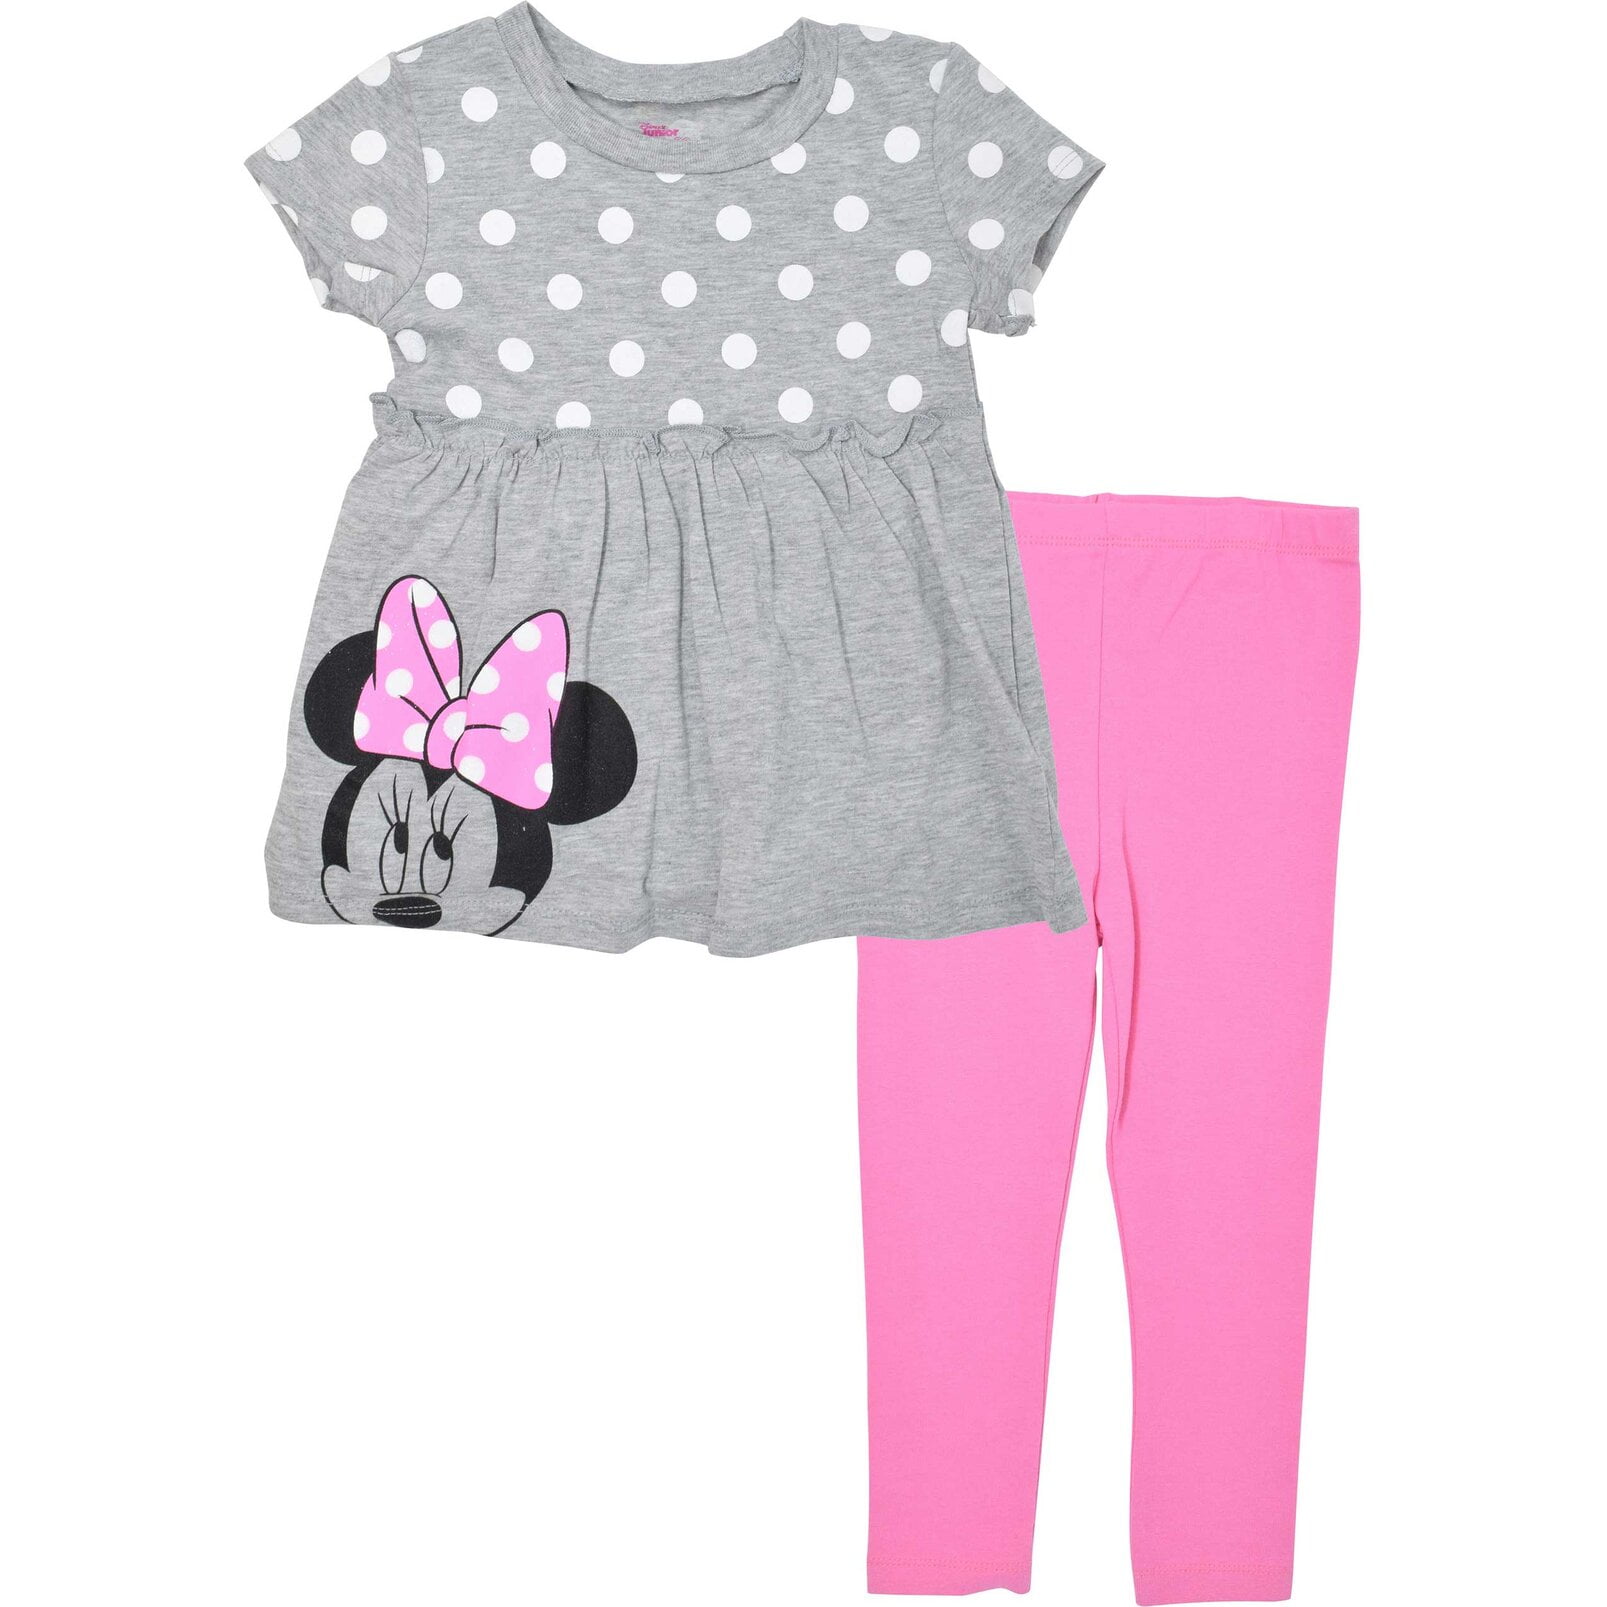 Mommy & Daughter Matching Louis Vuitton Minnie #clothing #women #tshirt  @MktgTool #disneyfamily…